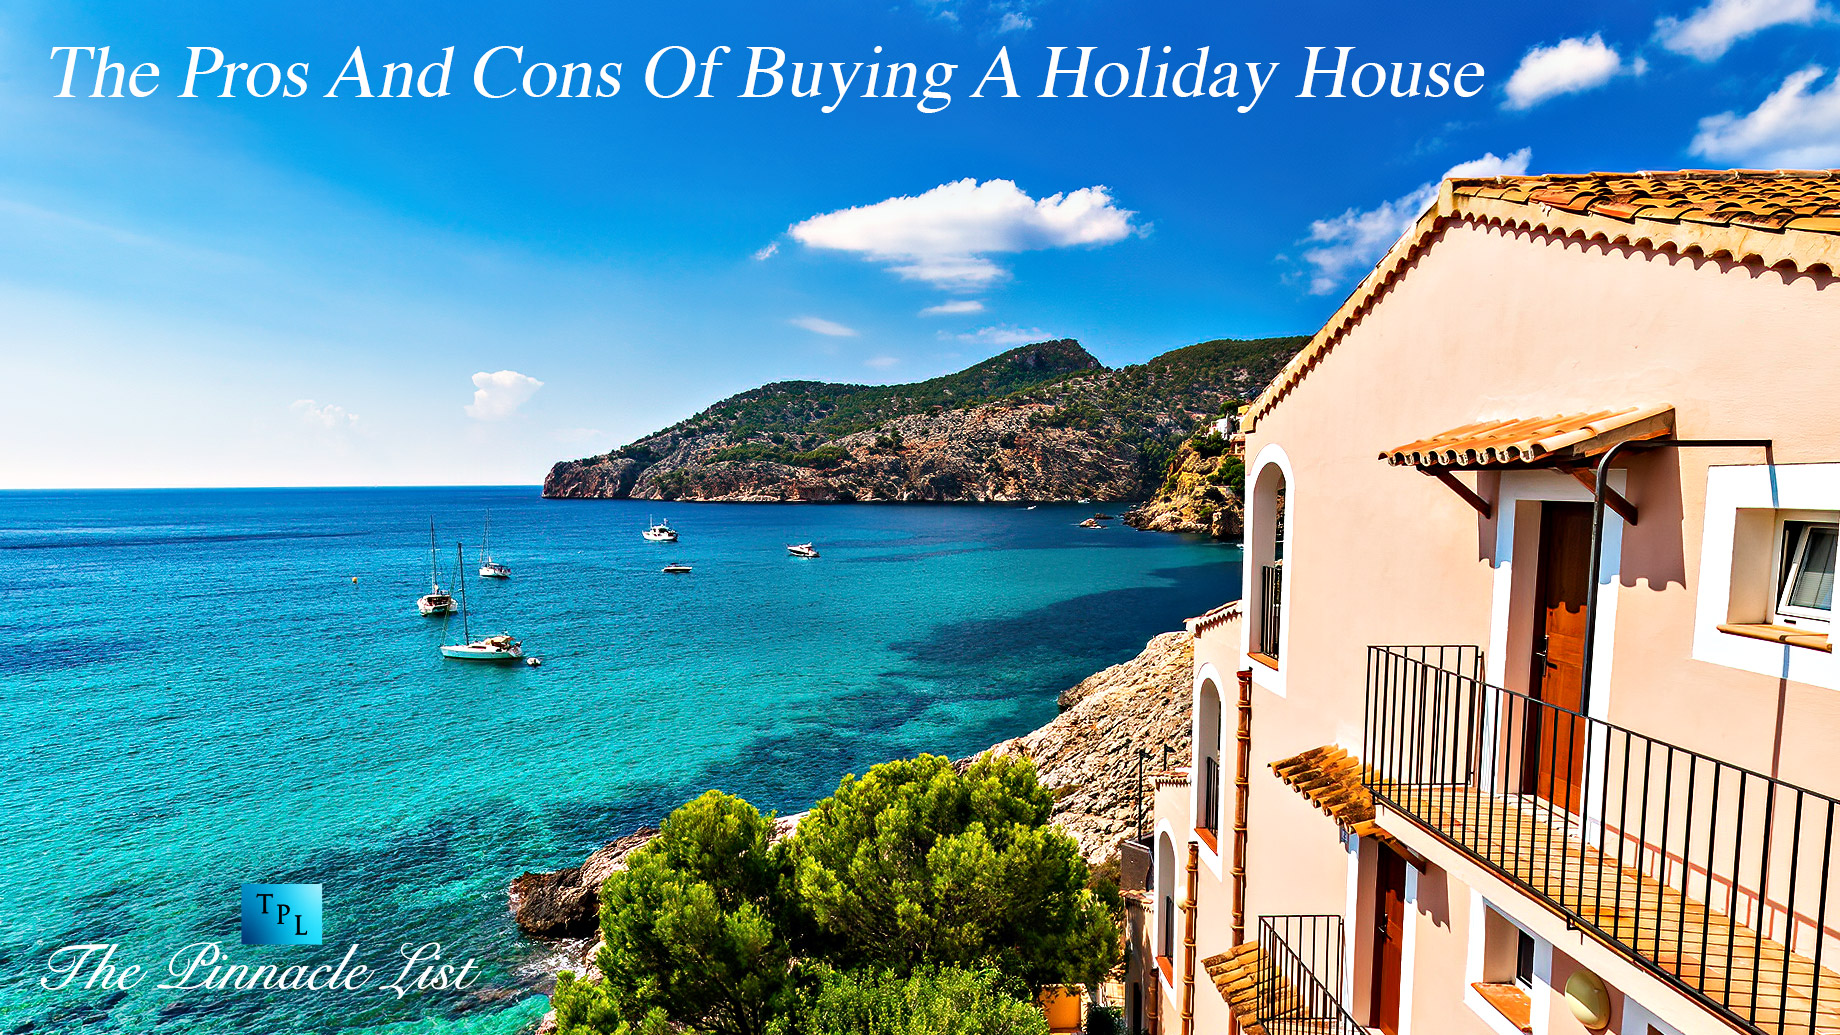 The Pros And Cons Of Buying A Holiday House